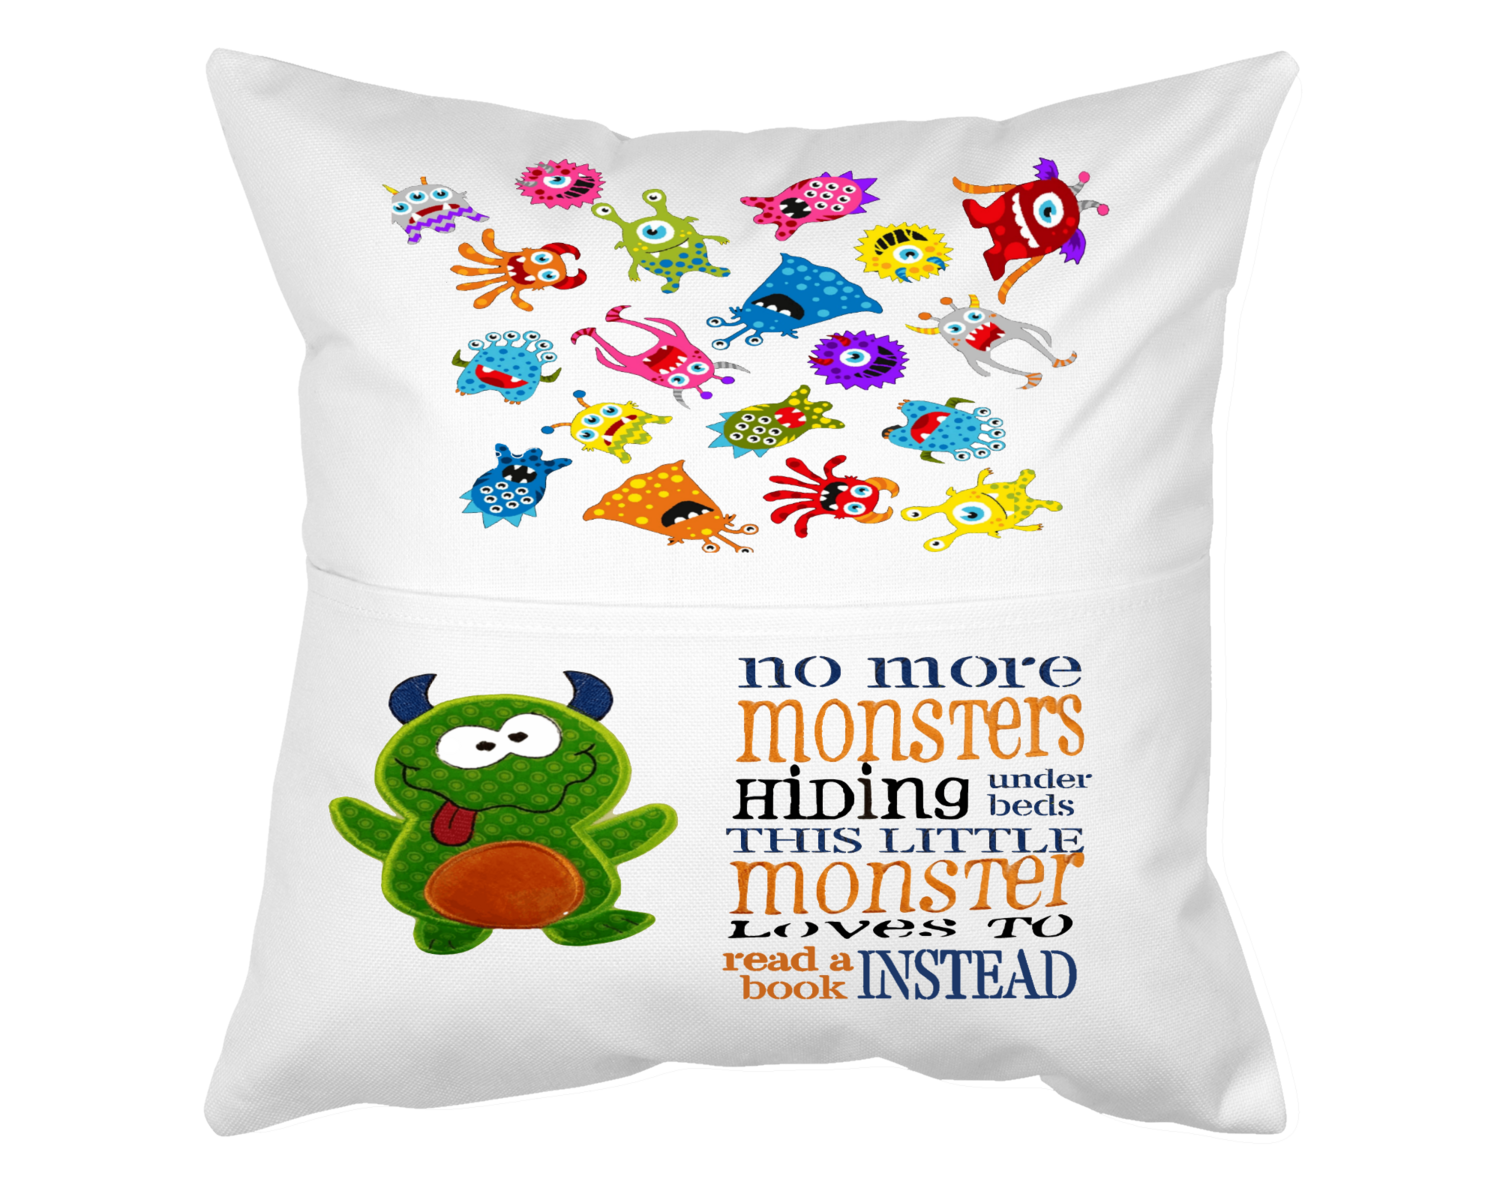 Pillow With Pocket: NO MORE MONSTERS HIDING UNDER THE BED, THIS LITTLE MONSTER LOVES TO READ A BOOK INSTEAD